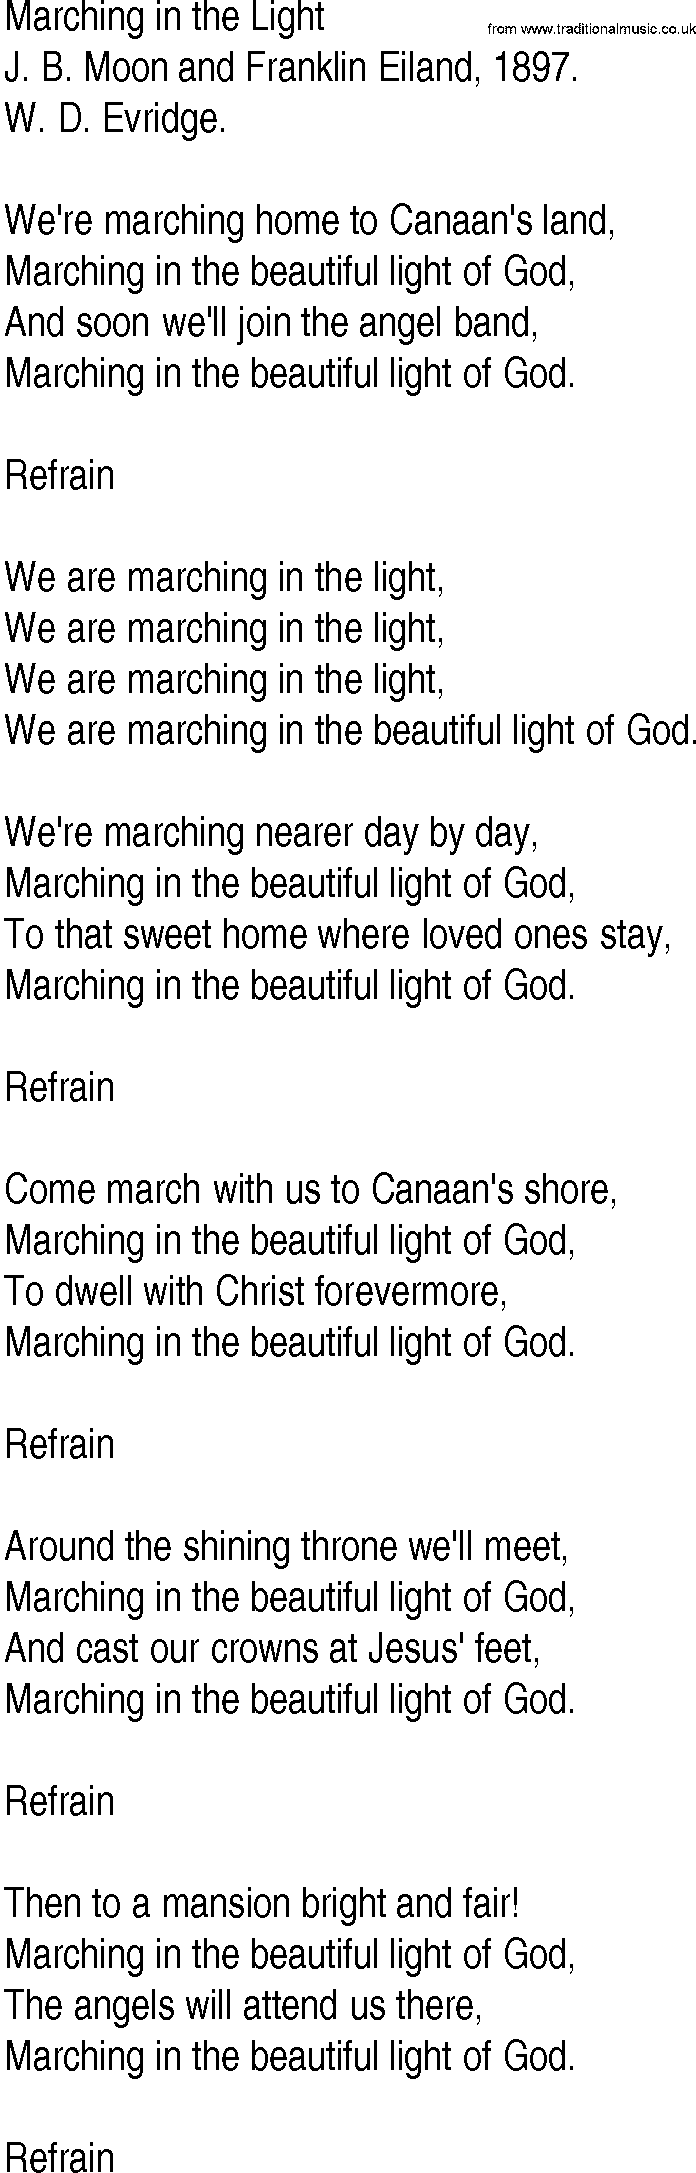 Hymn and Gospel Song: Marching in the Light by J B Moon and Franklin Eiland lyrics